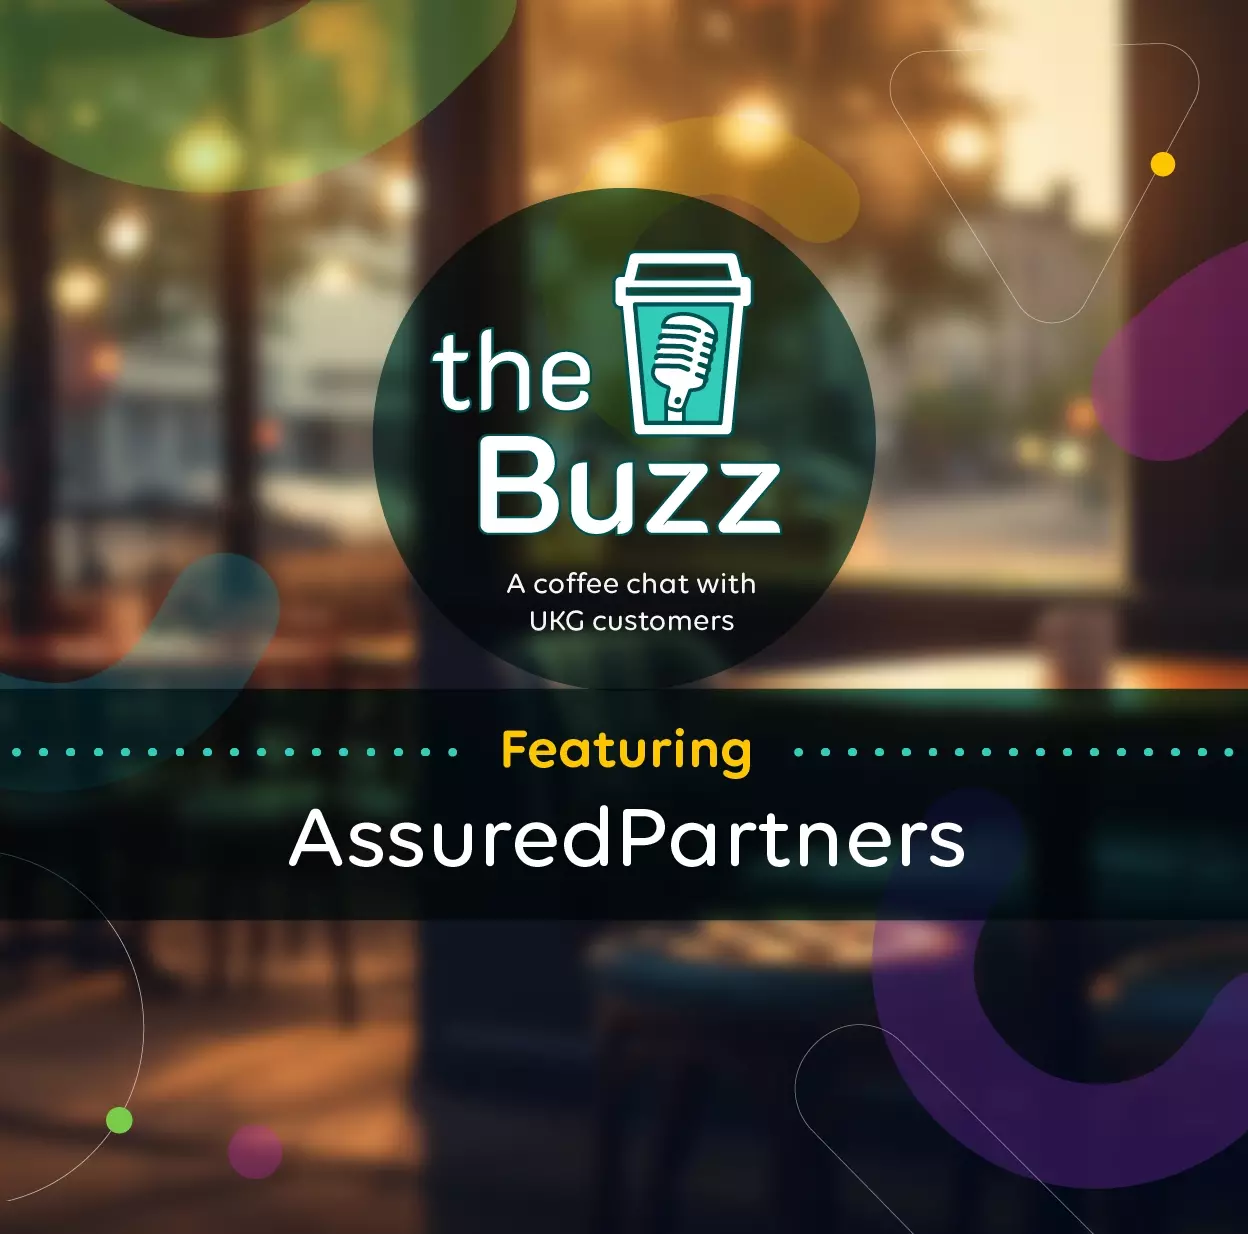 The Buzz: A Coffee Chat with UKG Customers Featuring AssuredPartners